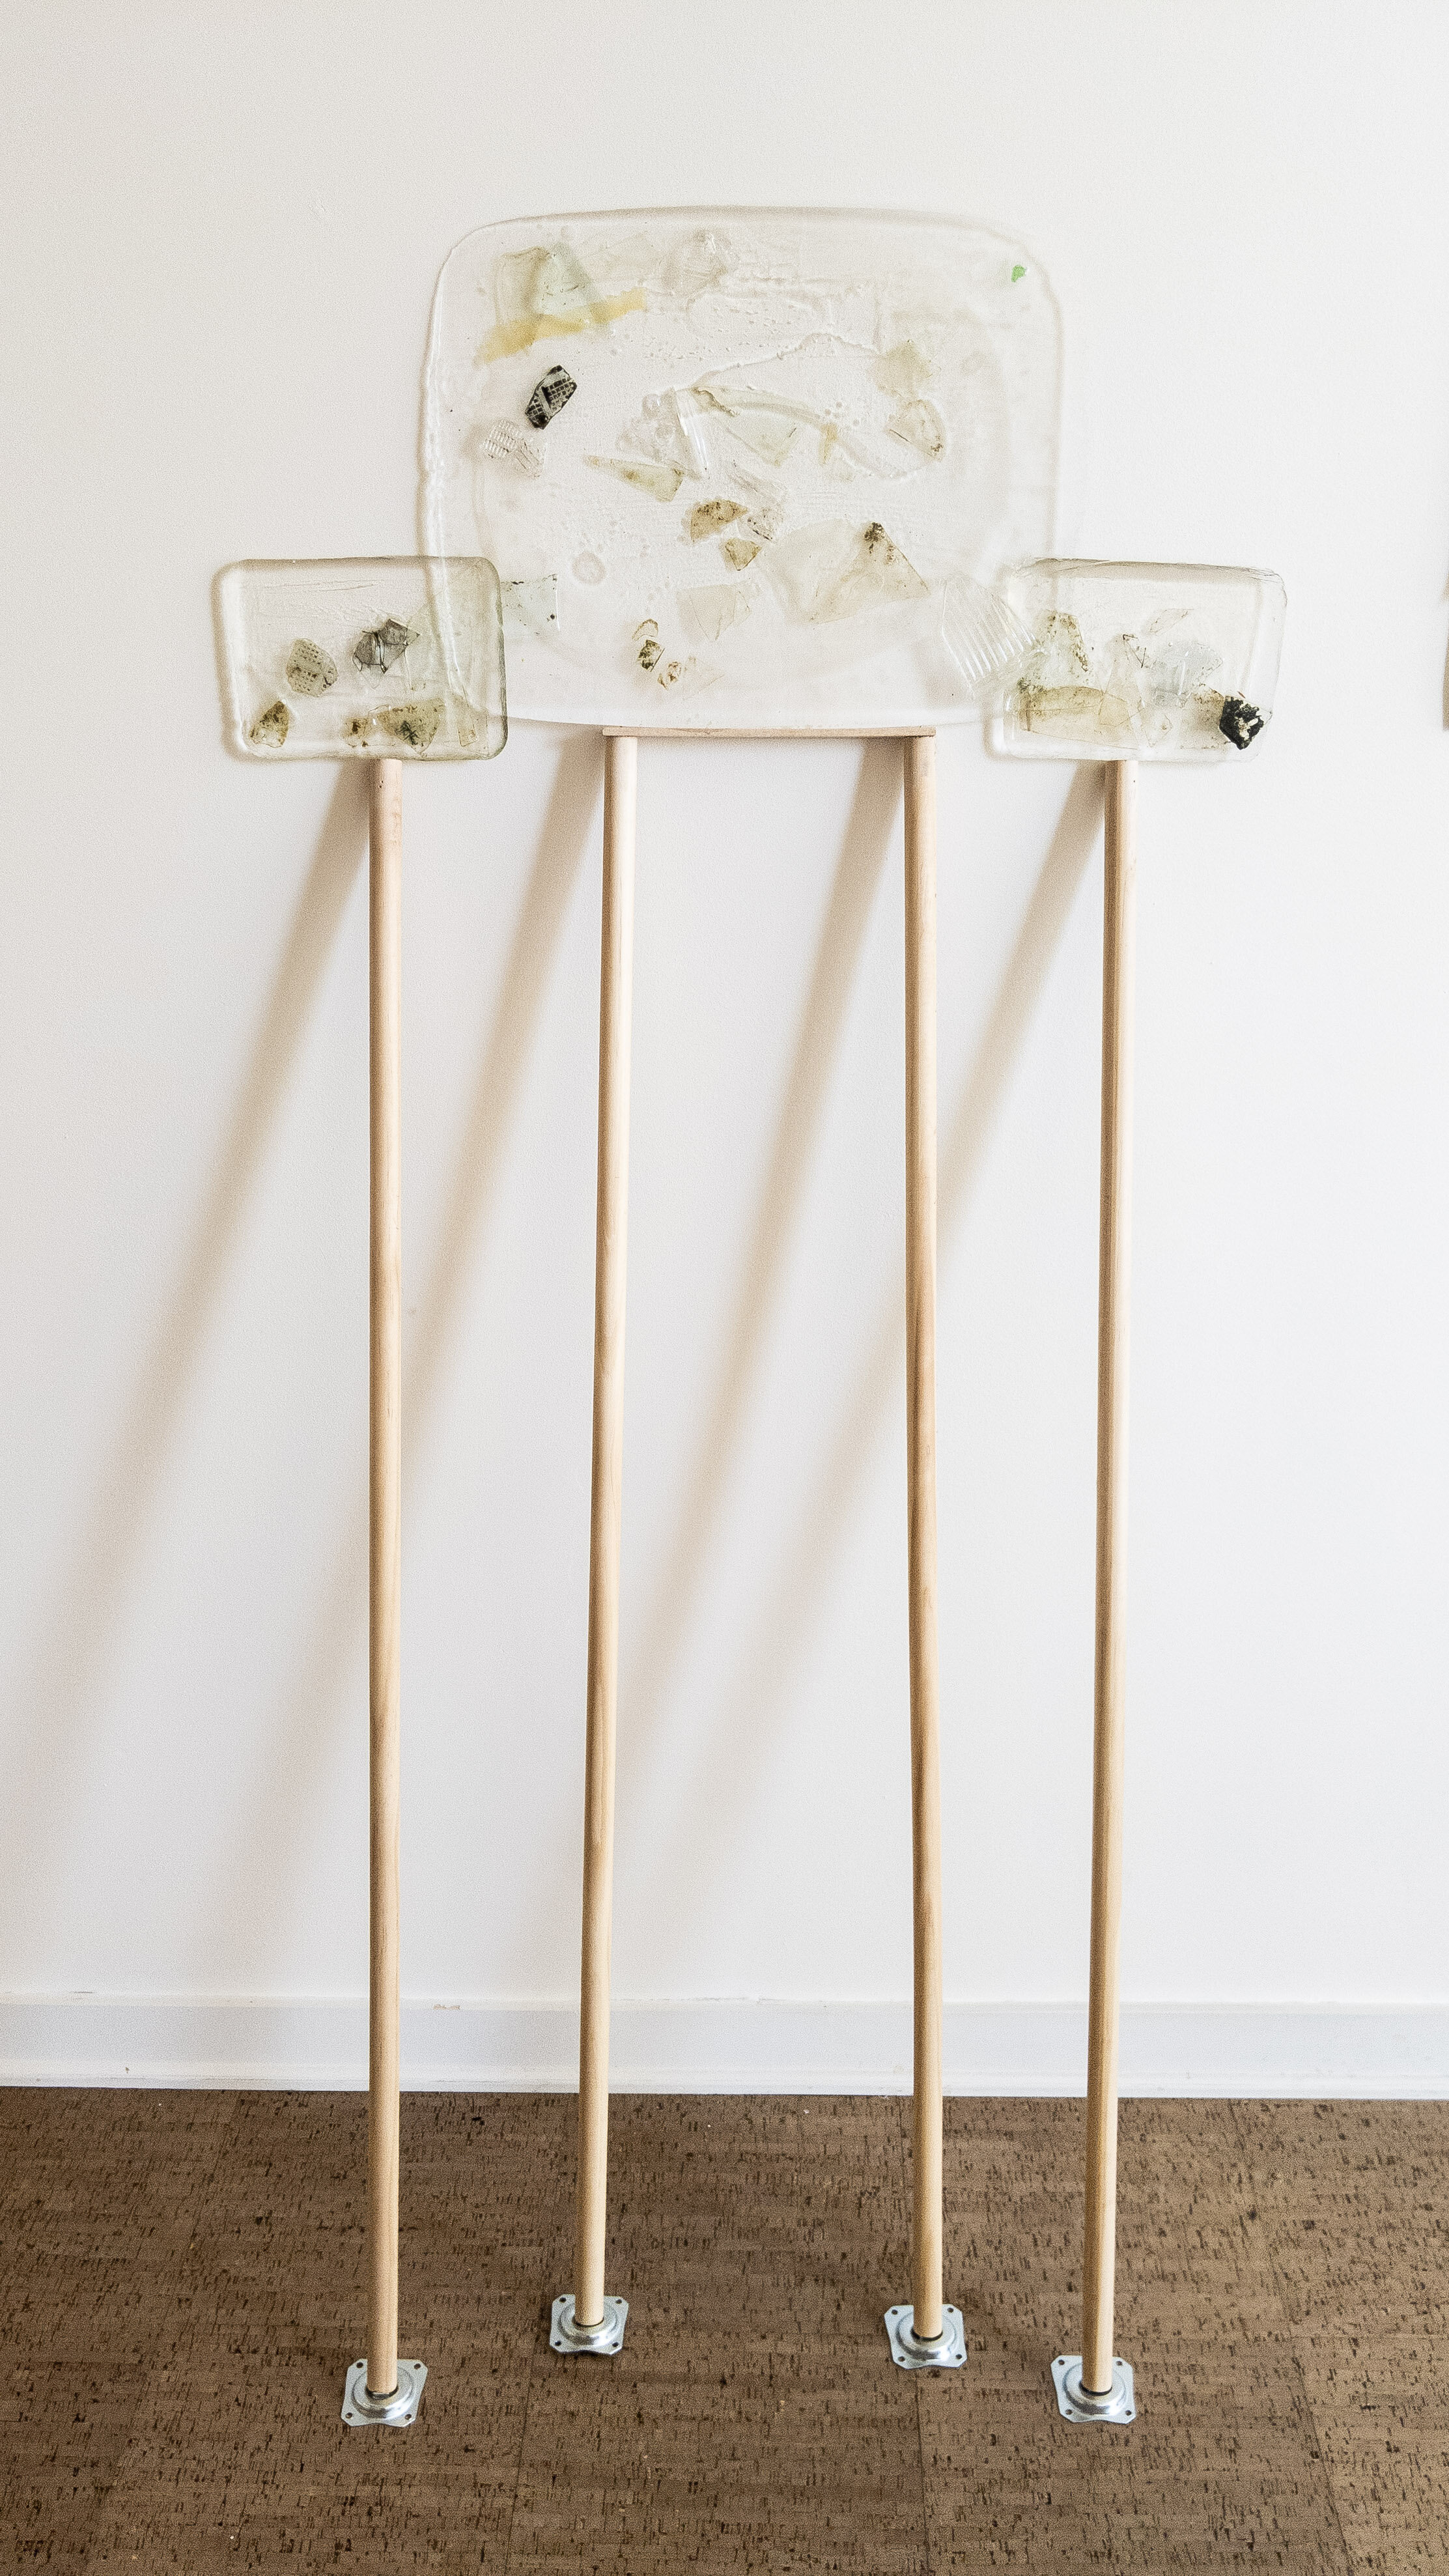   Shimmer Stroll , Mixed media, Found glass, epoxy resin,  4’ wooden dowel rods, and angled mounting plates  29’x61’’ 2020   